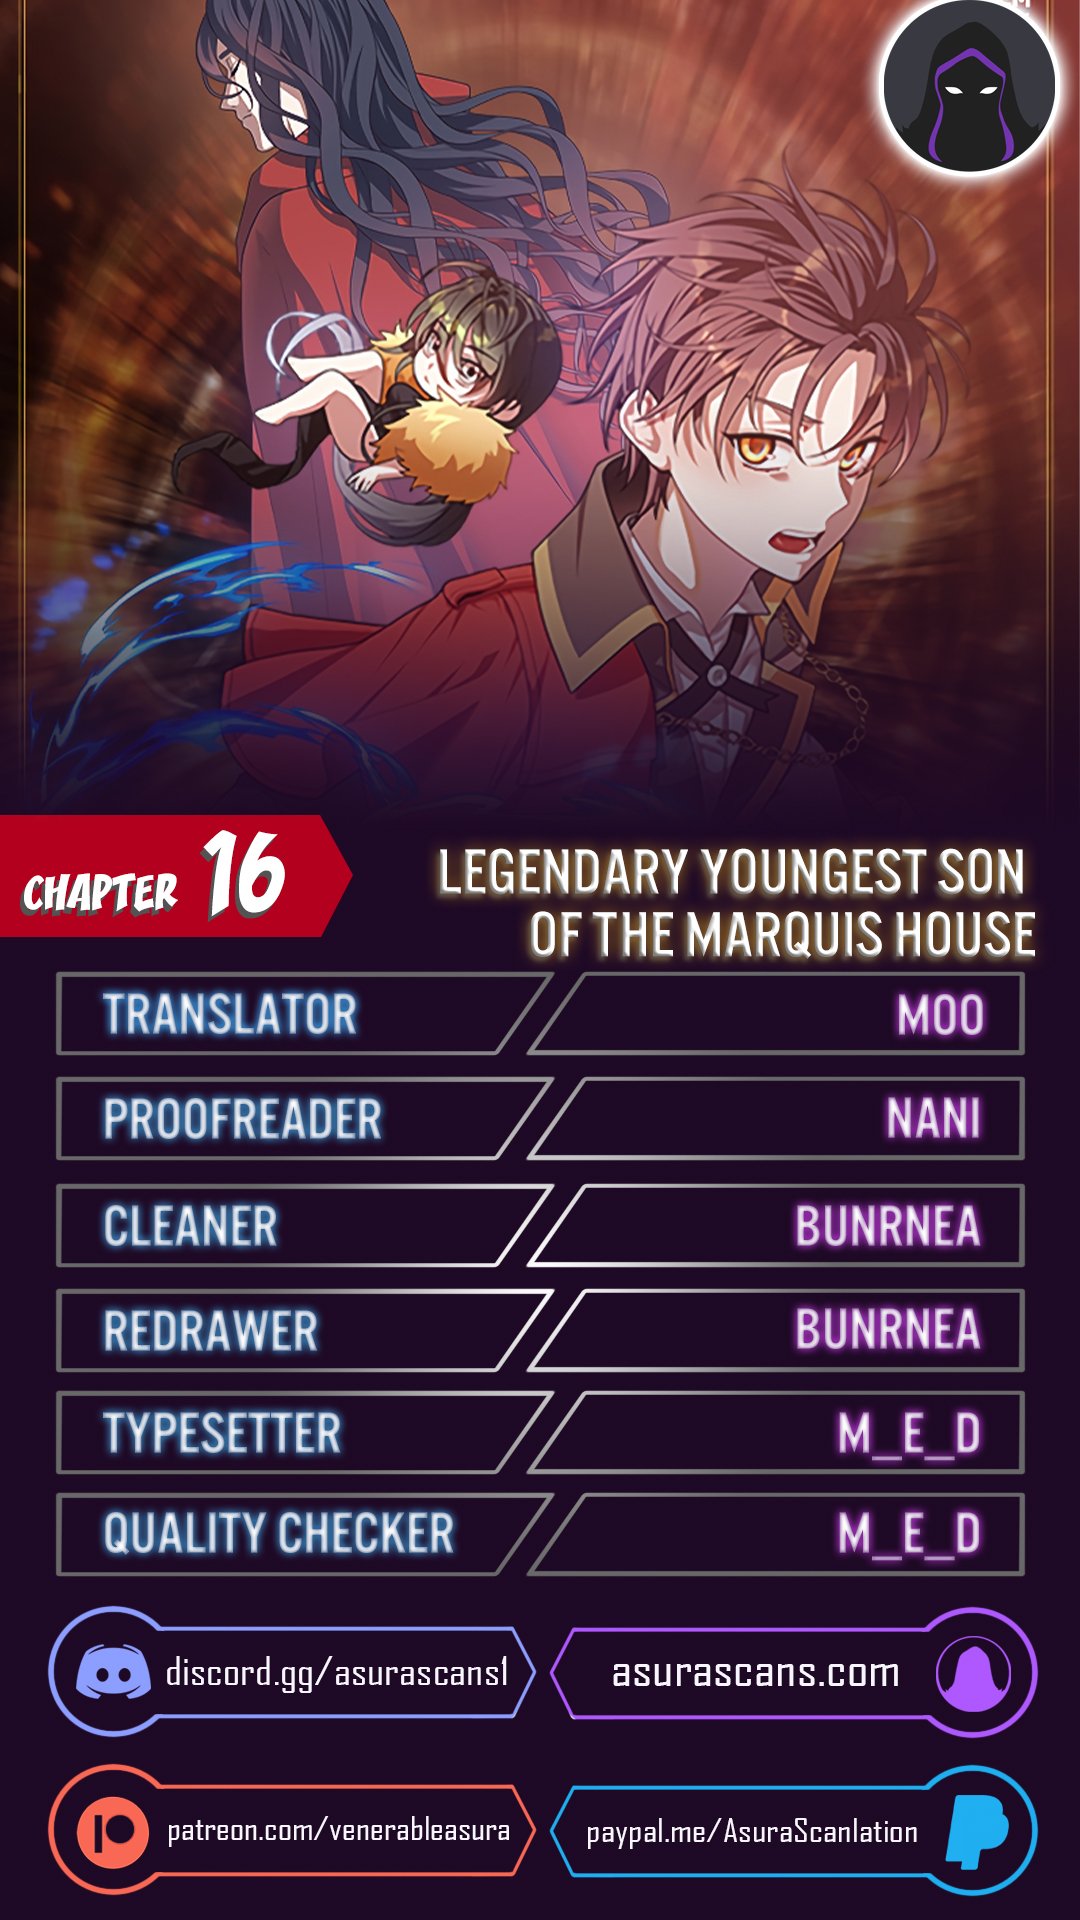 Legendary Youngest Son of the Marquis House - Chapter 18868 - Image 1